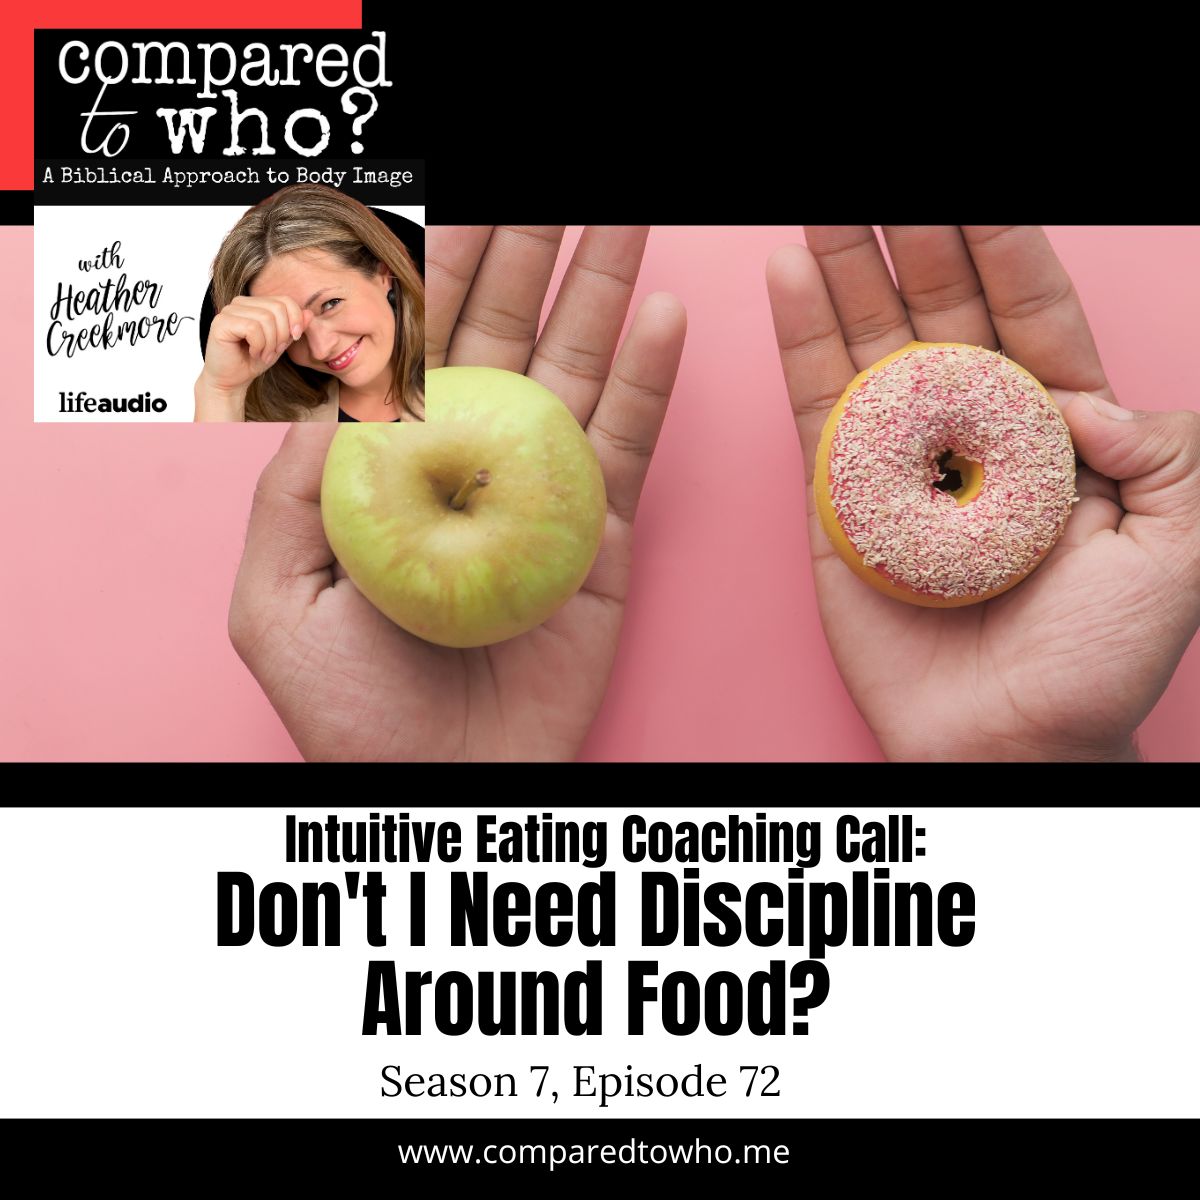 Don’t I Need More Discipline Around Food? Intuitive Eating Coaching Call